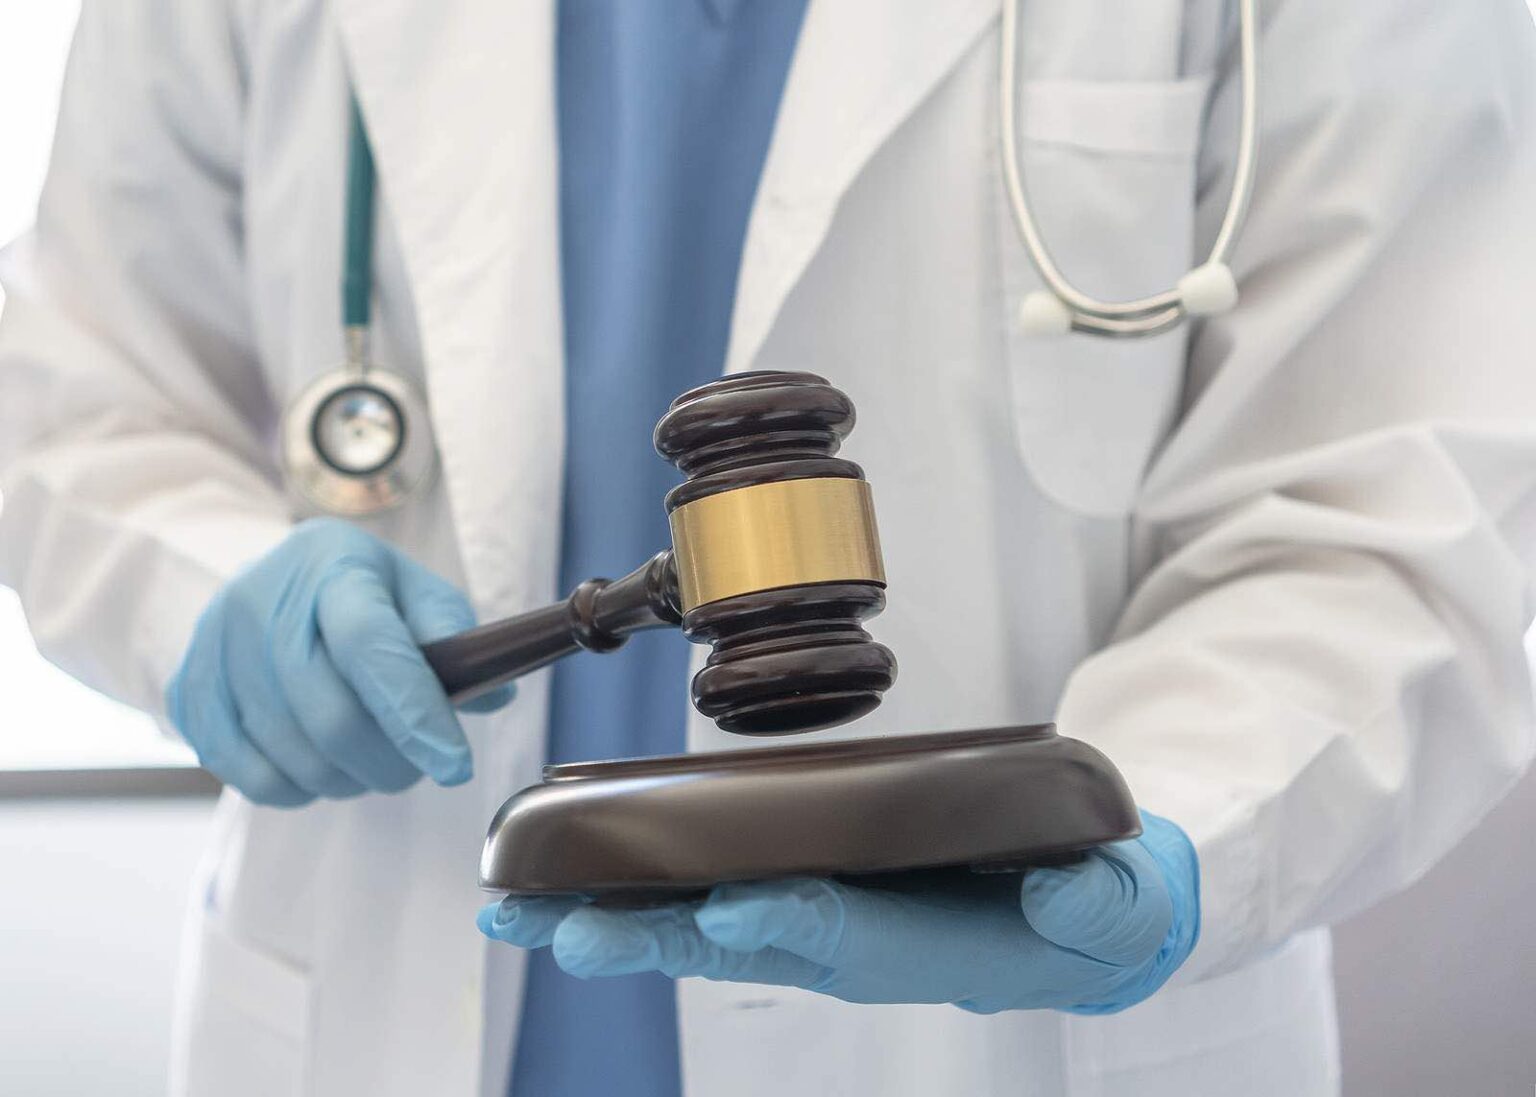 Why are medical malpractice lawsuits so hard to win? Here are the 3 major hurdles a plaintiff faces when handling such a claim.